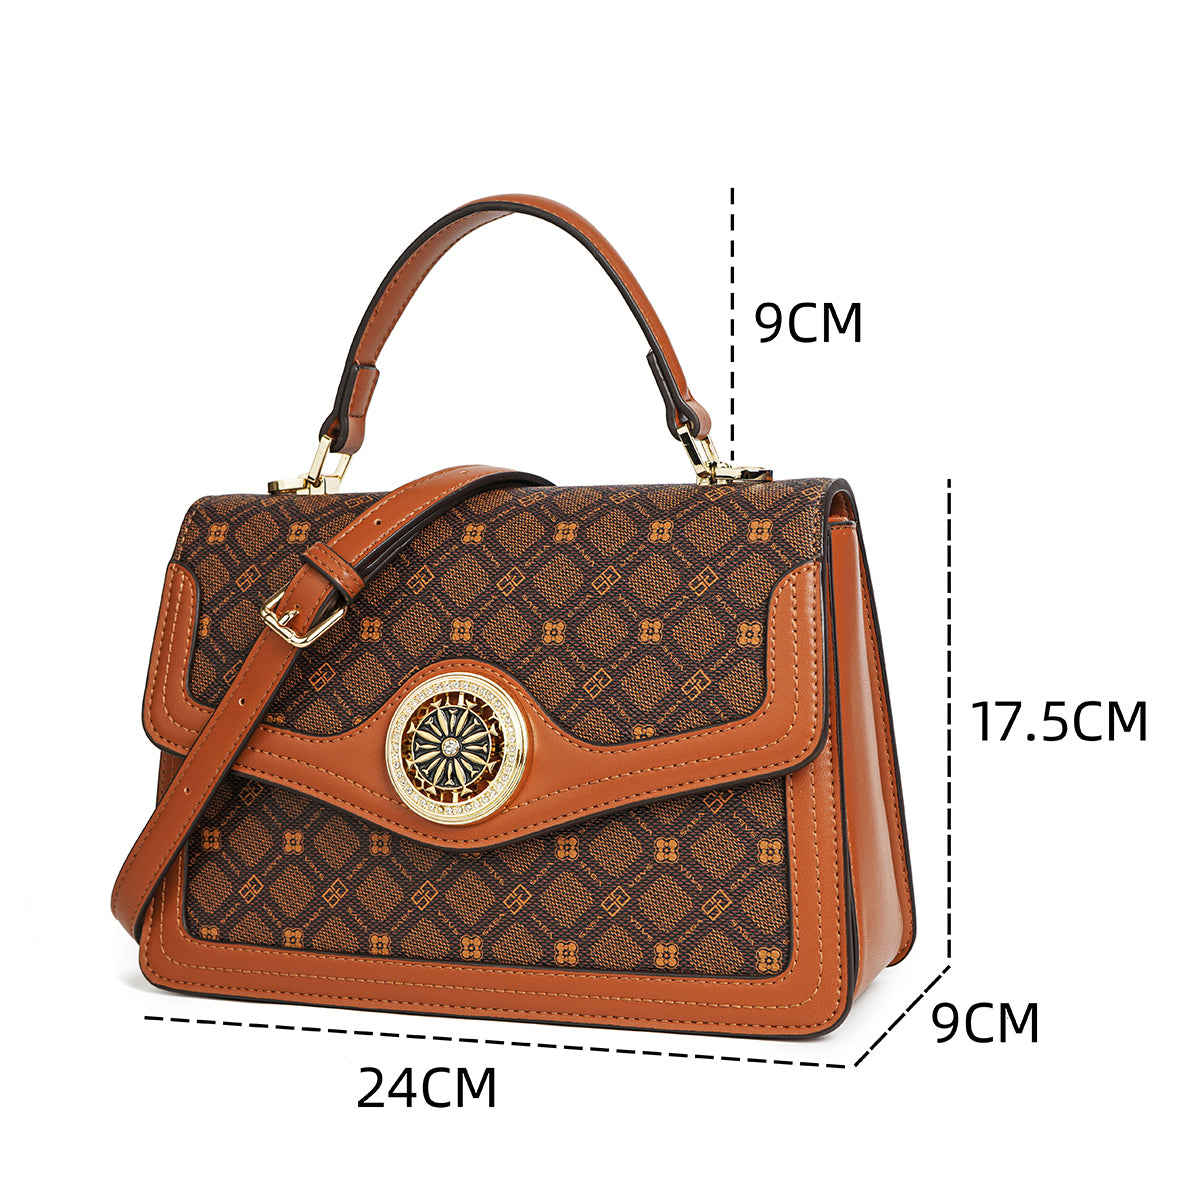 Practical and comfortable handbag in several colors with attractive and elegant accessories